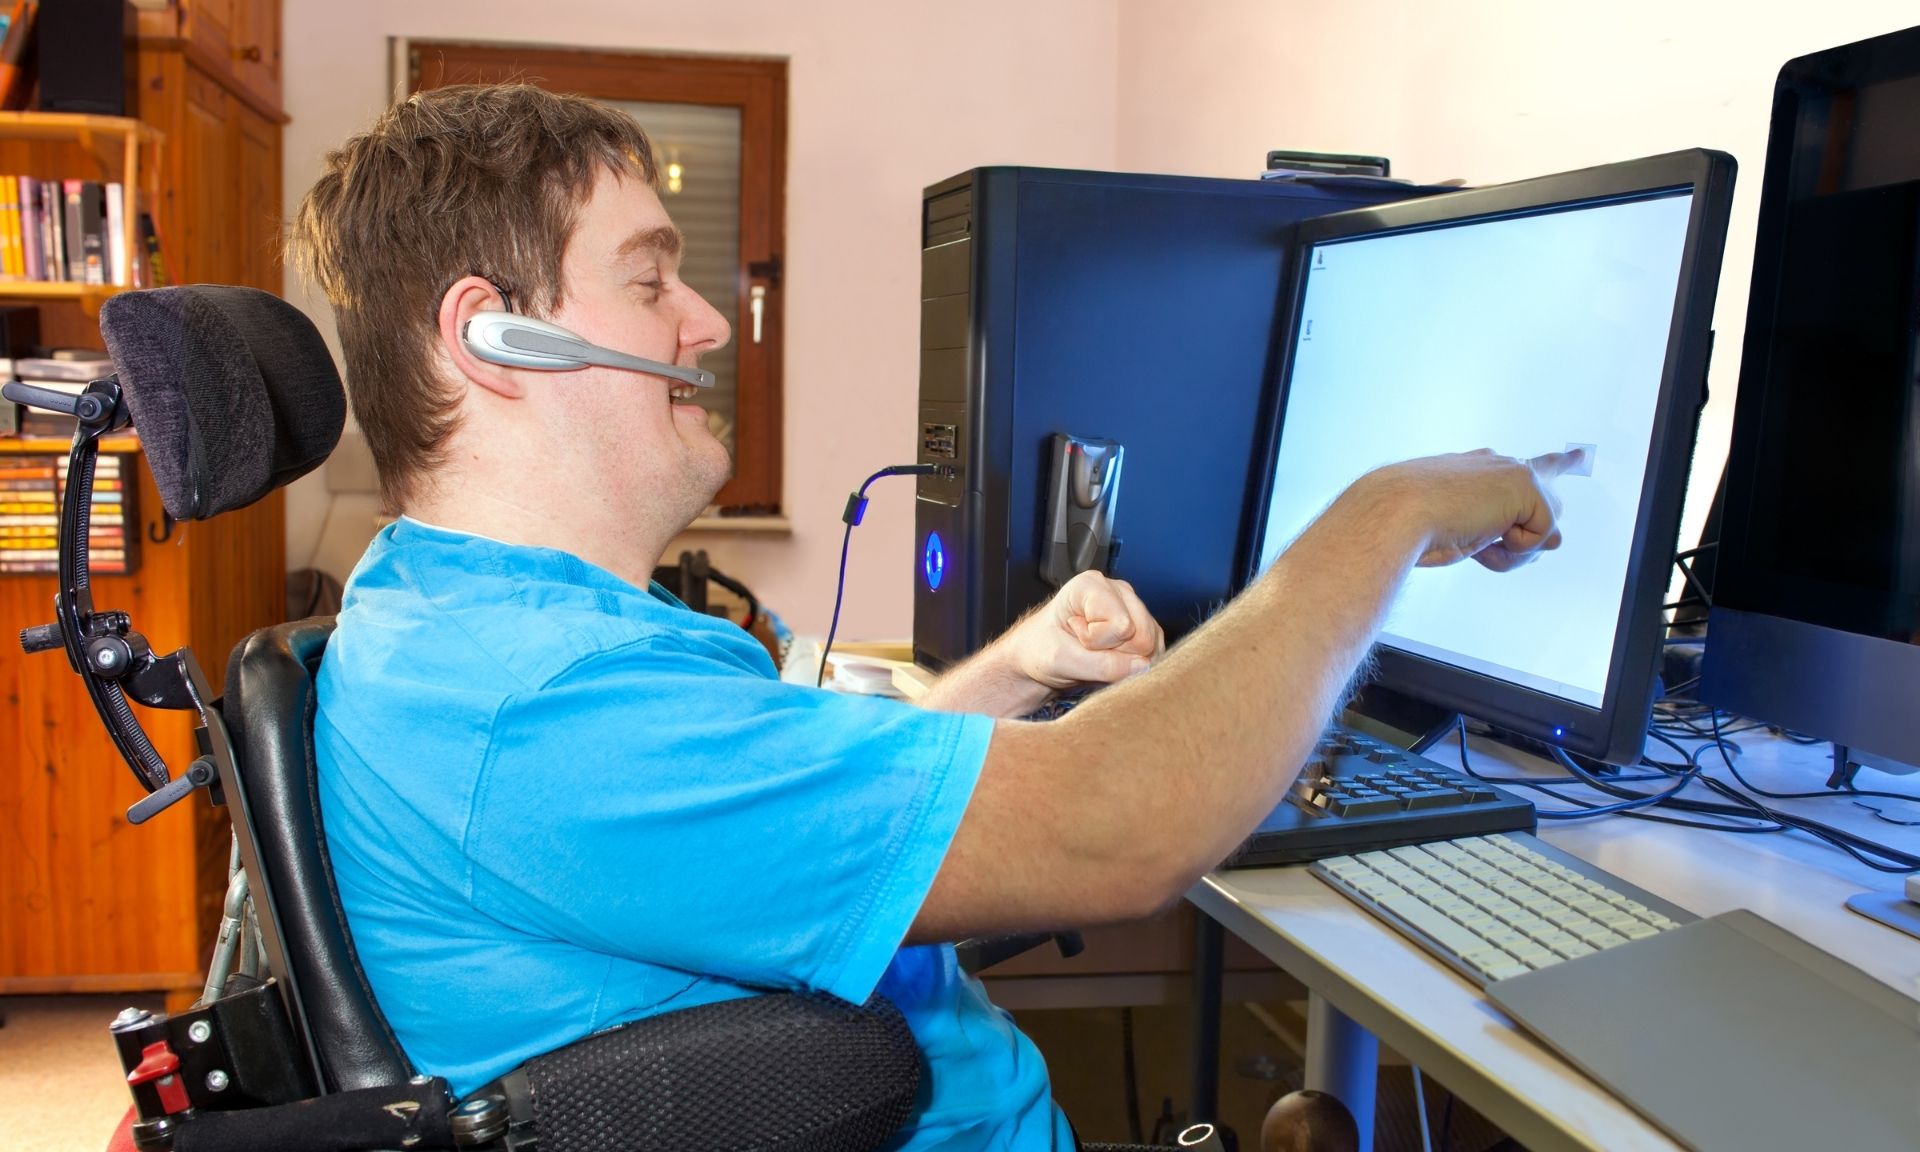 an individual with disabilities using a computer